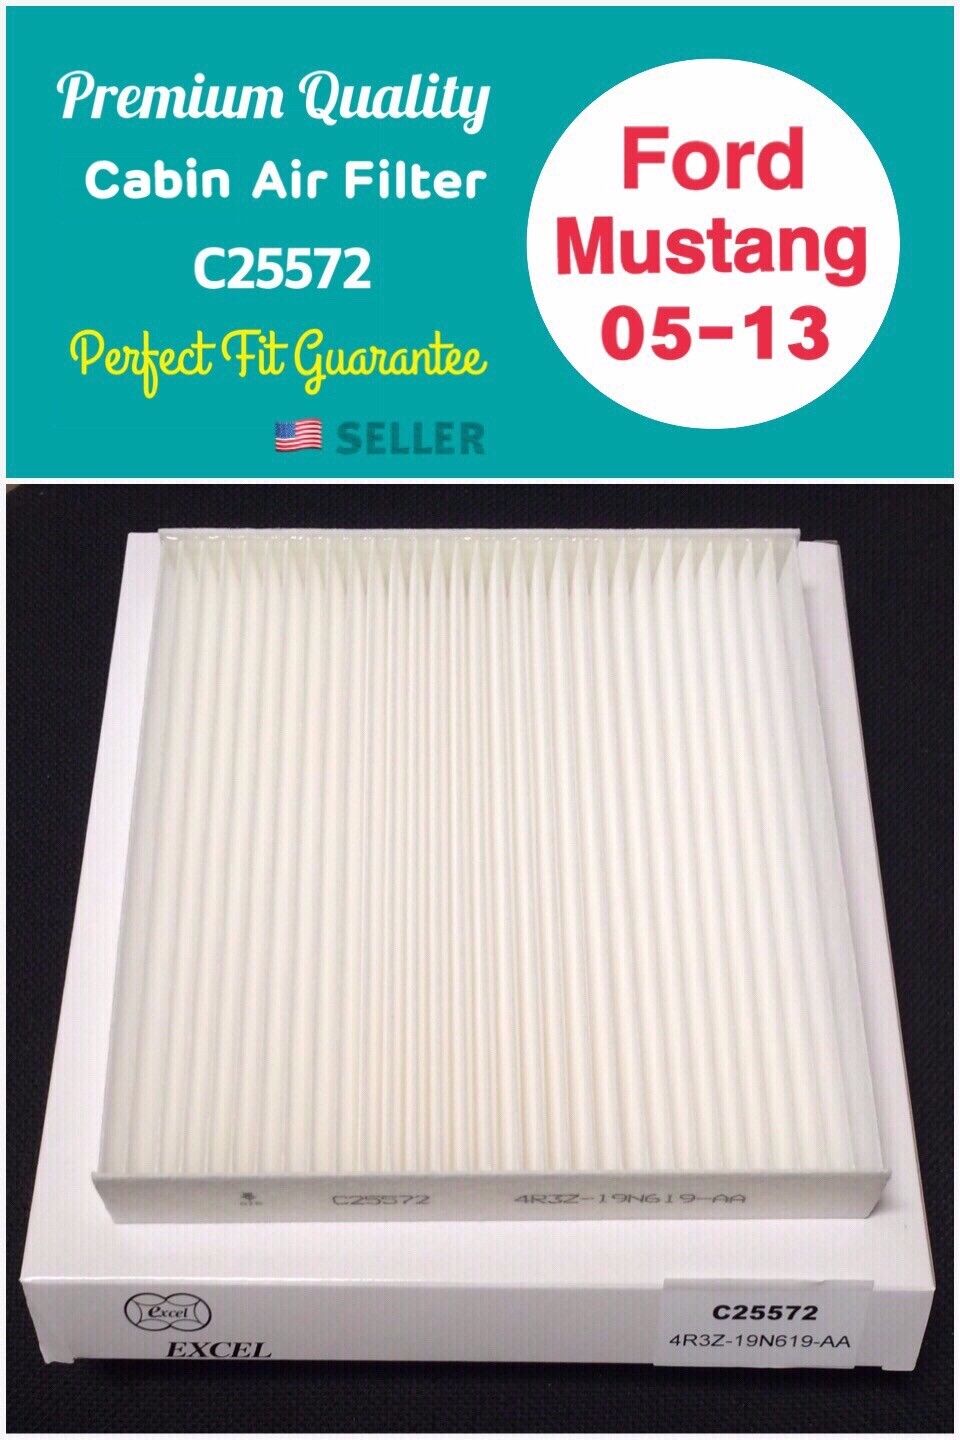 C25572 AC CABIN AIR FILTER for 2005-2014 Ford Mustang Fast ship Us seller\(^_^)/